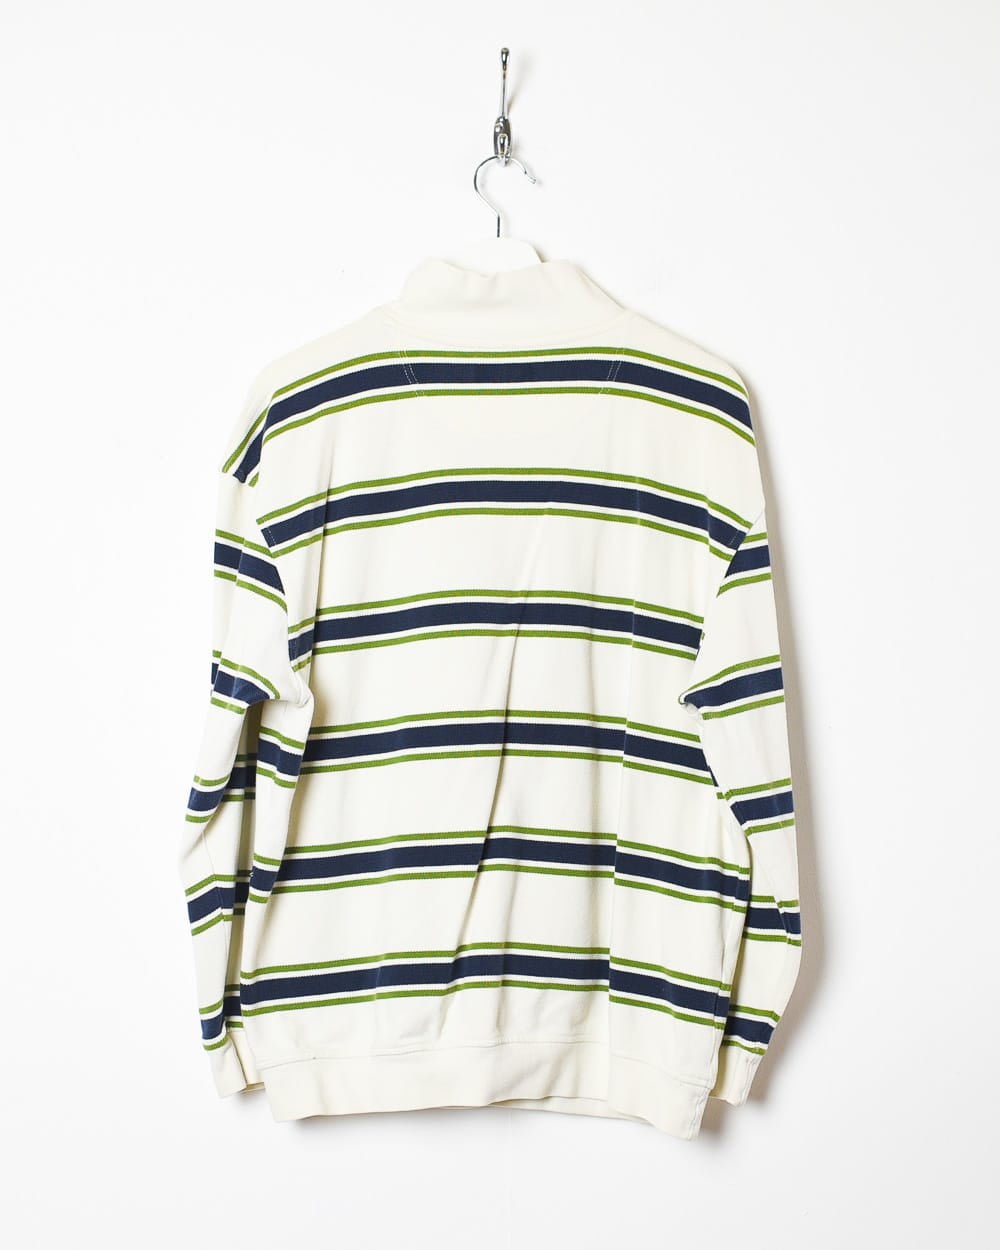 Neutral Fred Perry 1/4 Sweatshirt - Small